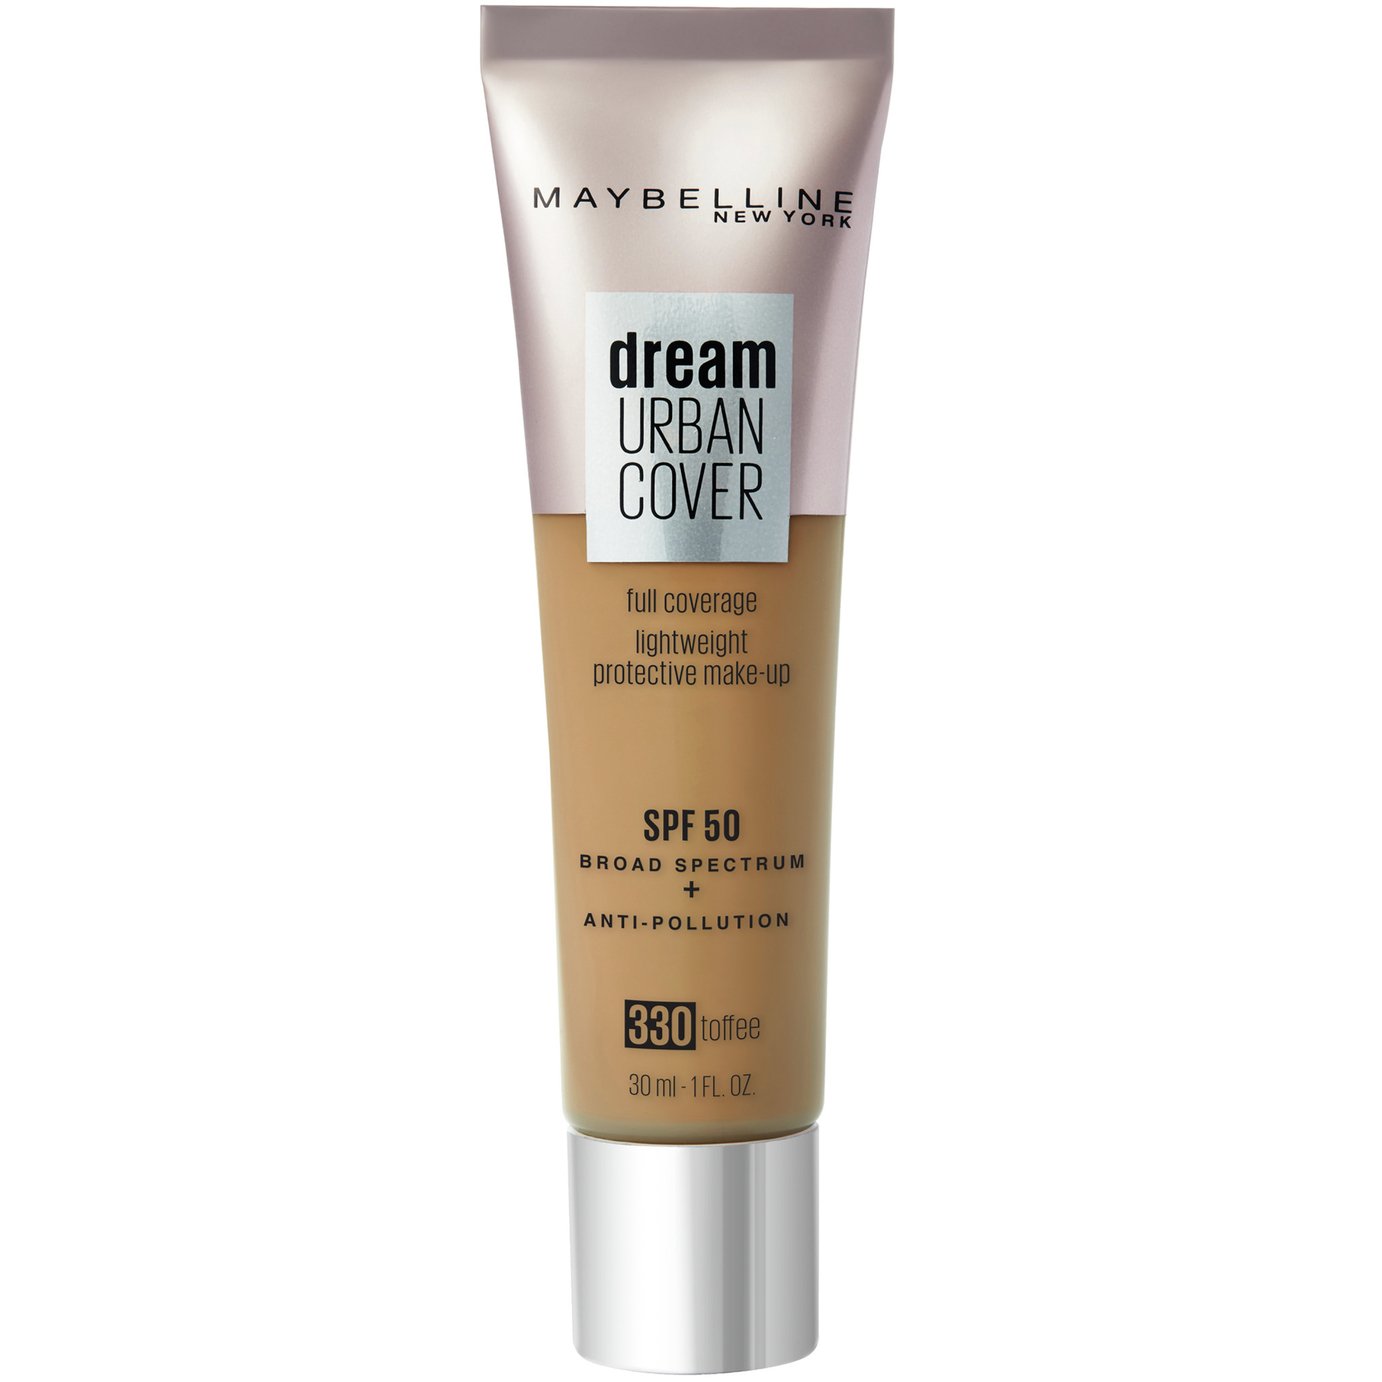 Maybelline Dream Urban Cover Foundation - Toffee